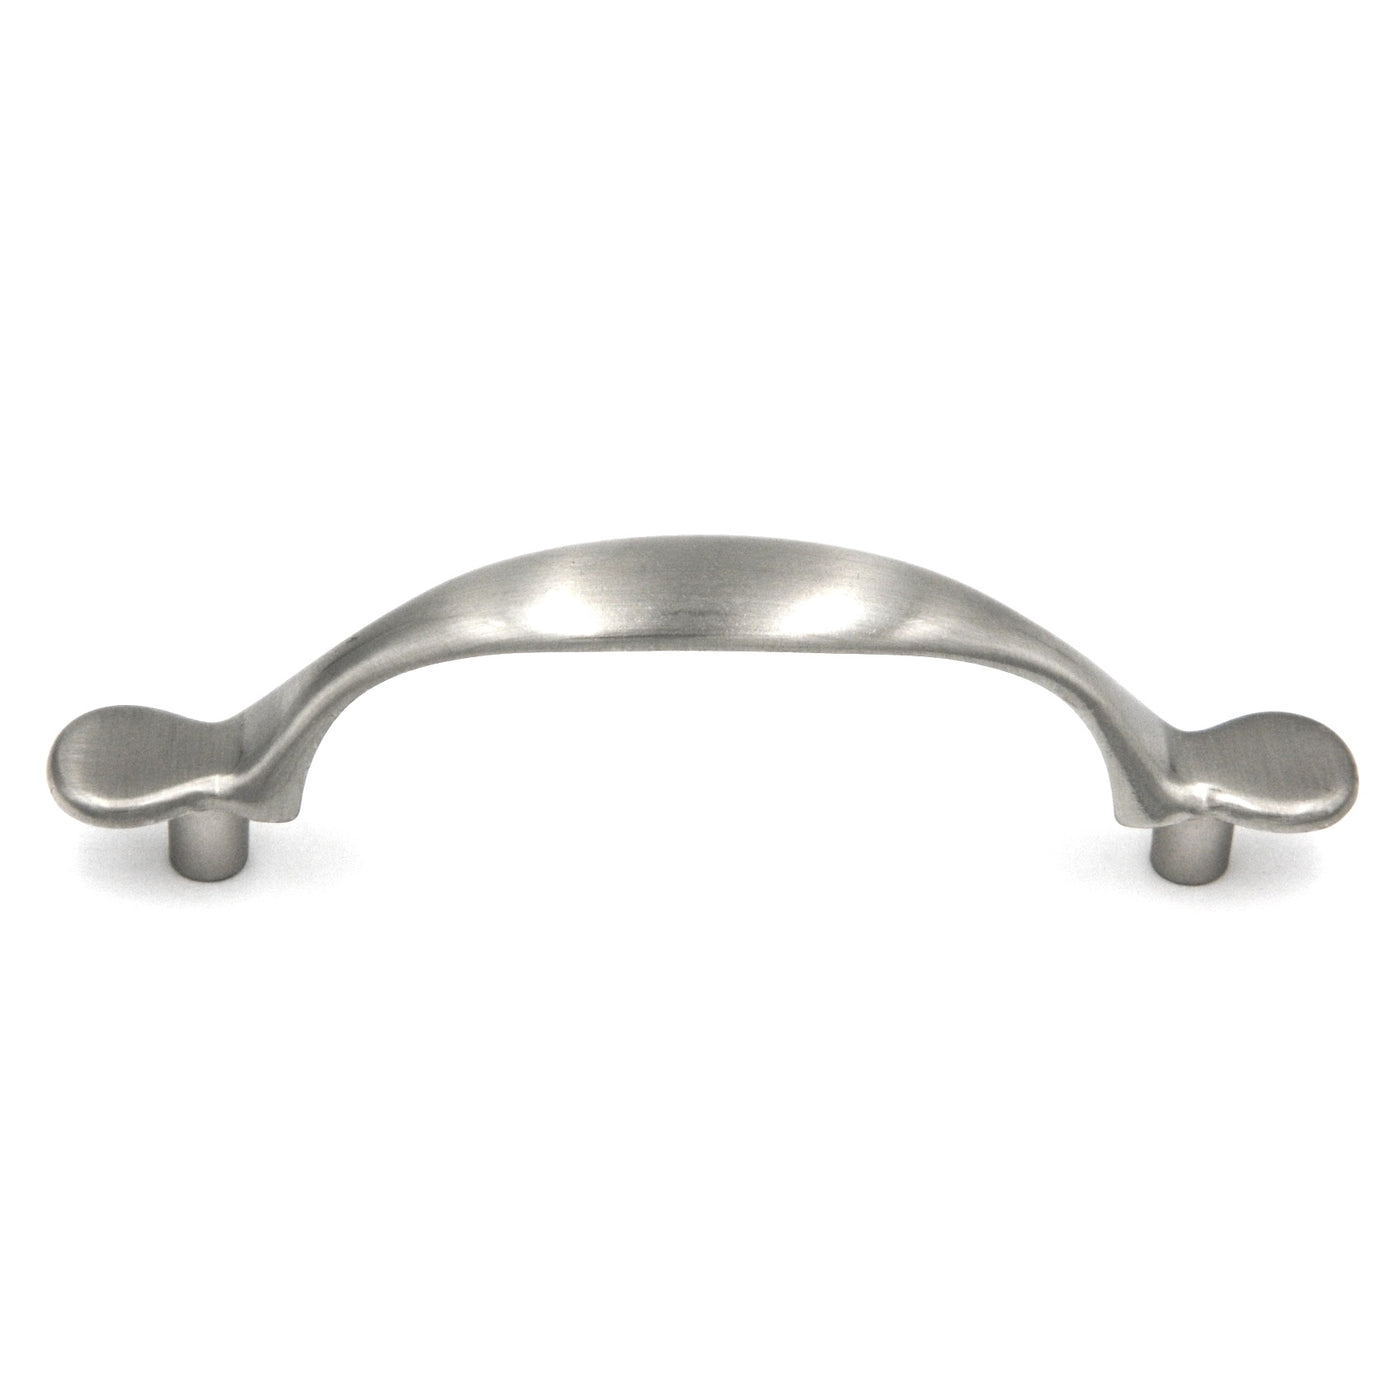 Hickory Hardware Conquest Satin Nickel Cabinet 3cc Handle Pull P14170